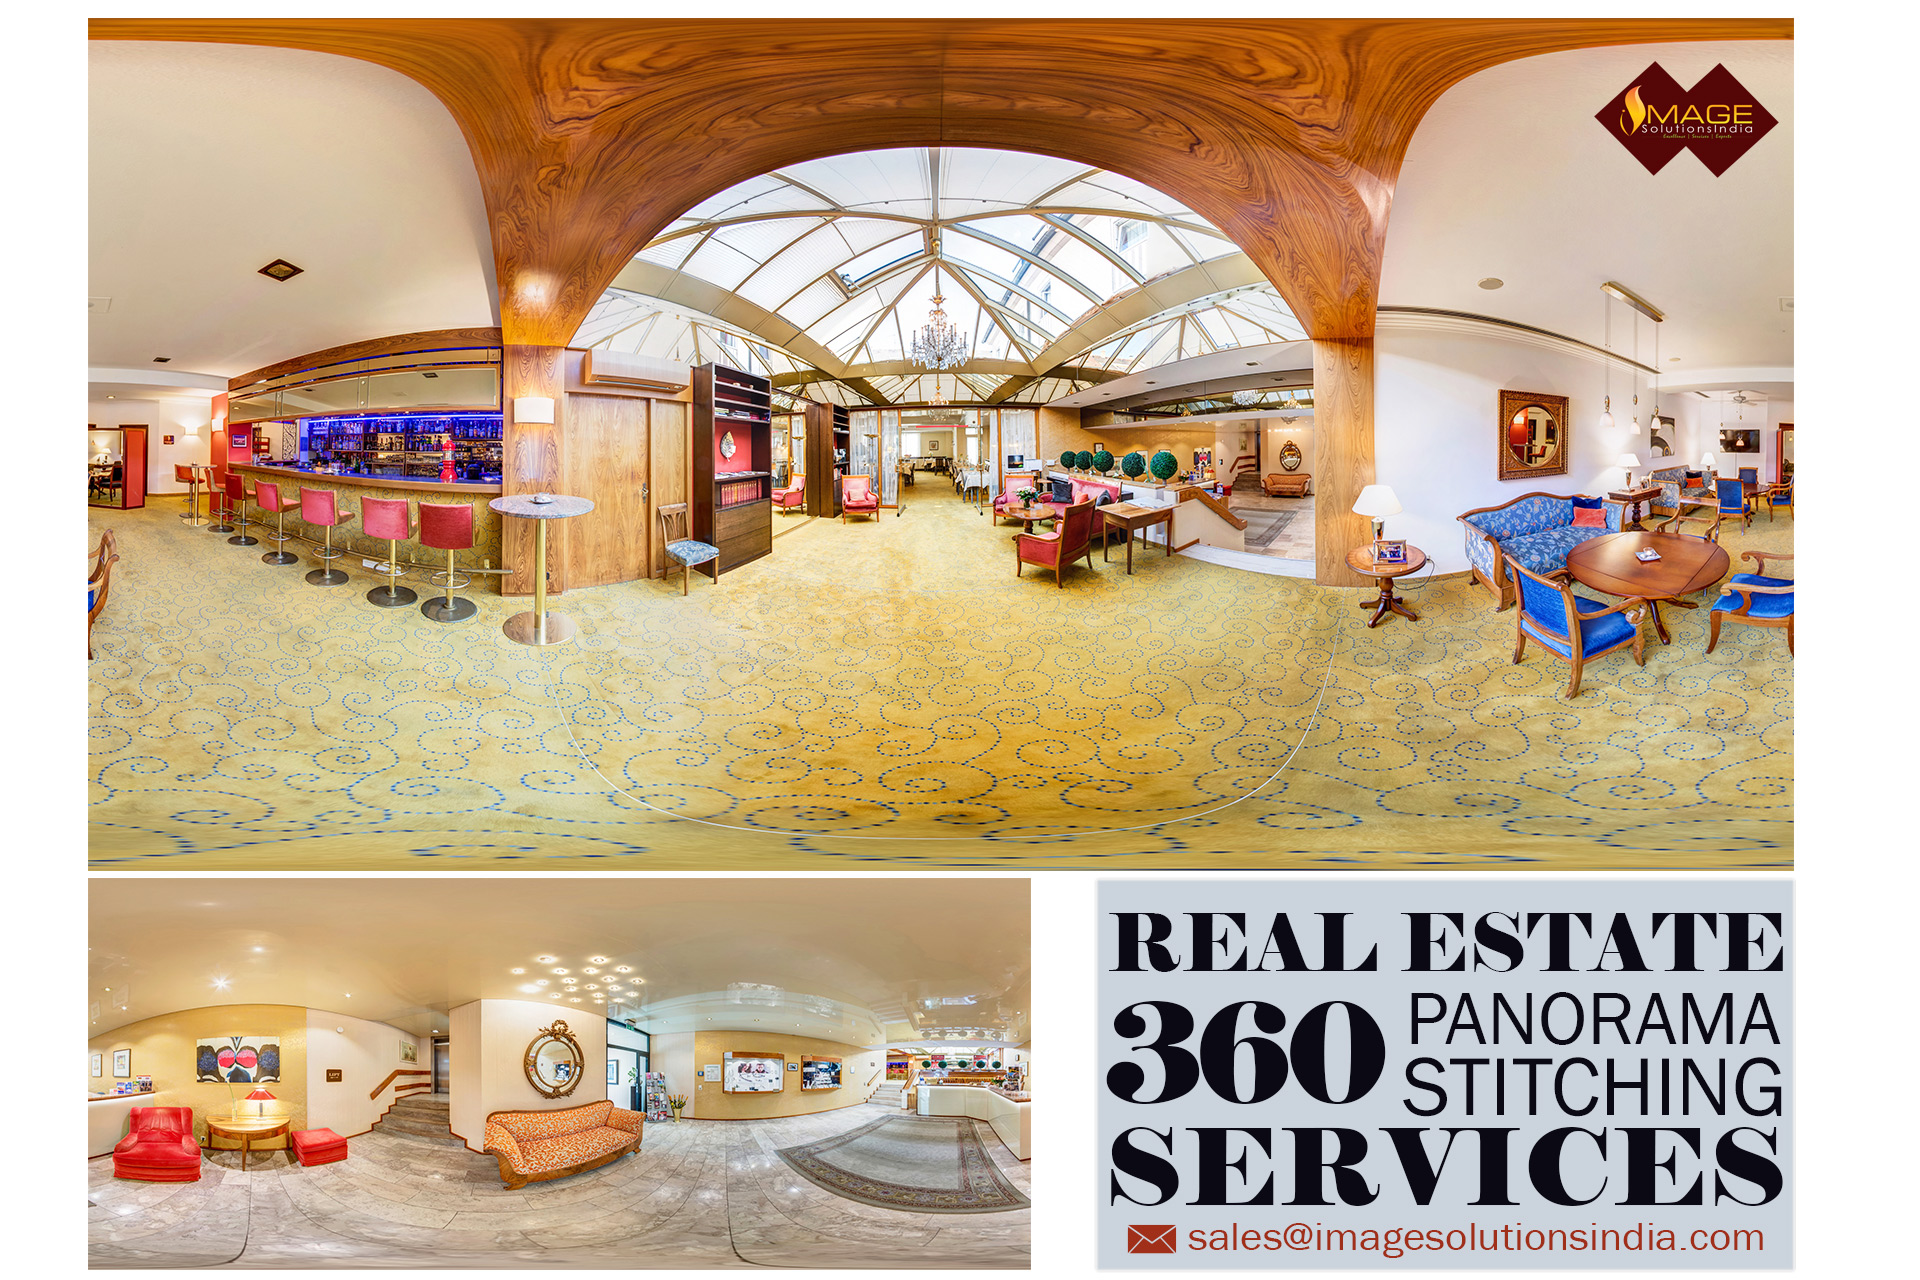 Real Estate Panorama Services | Architectural Panorama| Aerial Panorama Stitching Services